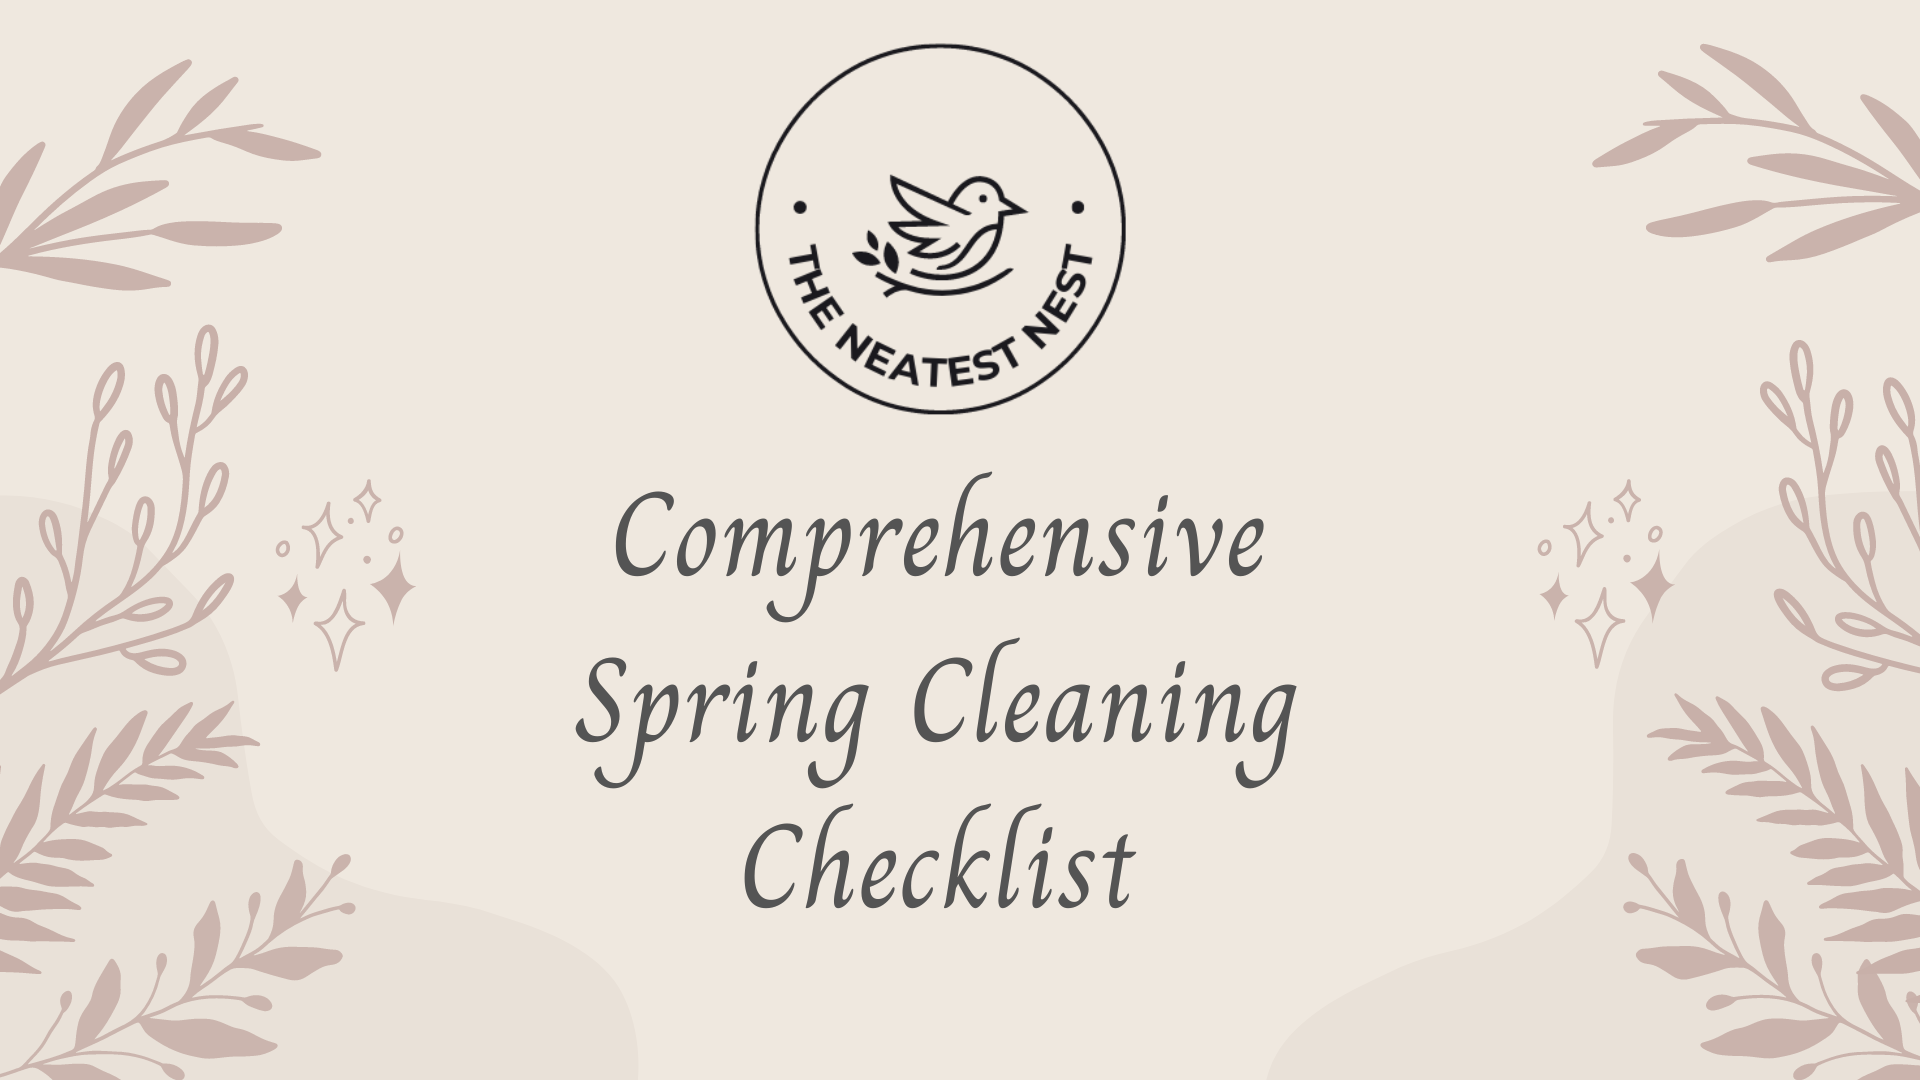 Comprehensive Spring Cleaning Checklist